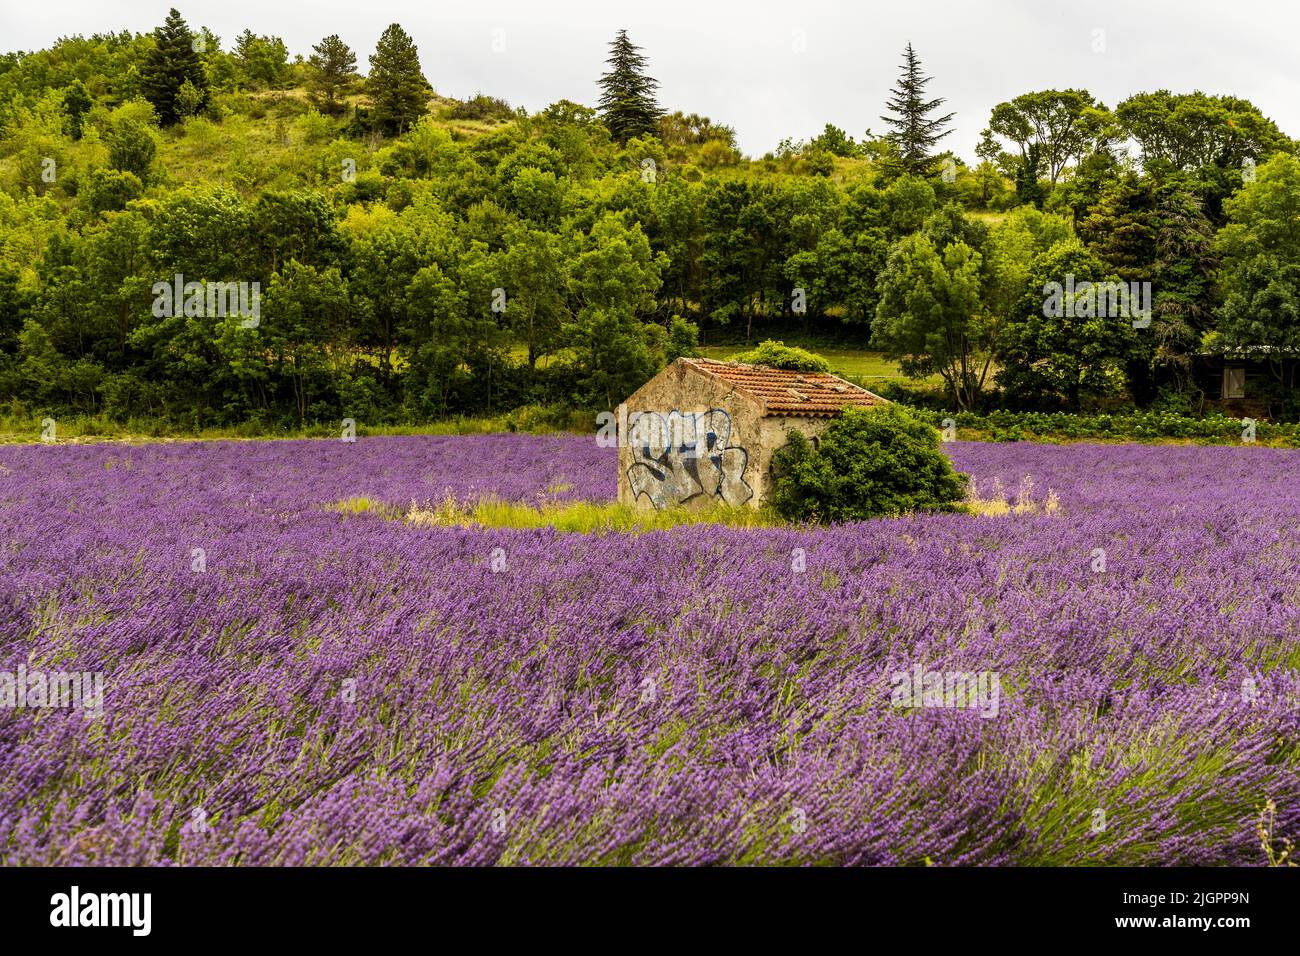 Lavender field with old stone house and graffiti. In the valley of the Drome the Alps meet Provence Stock Photo